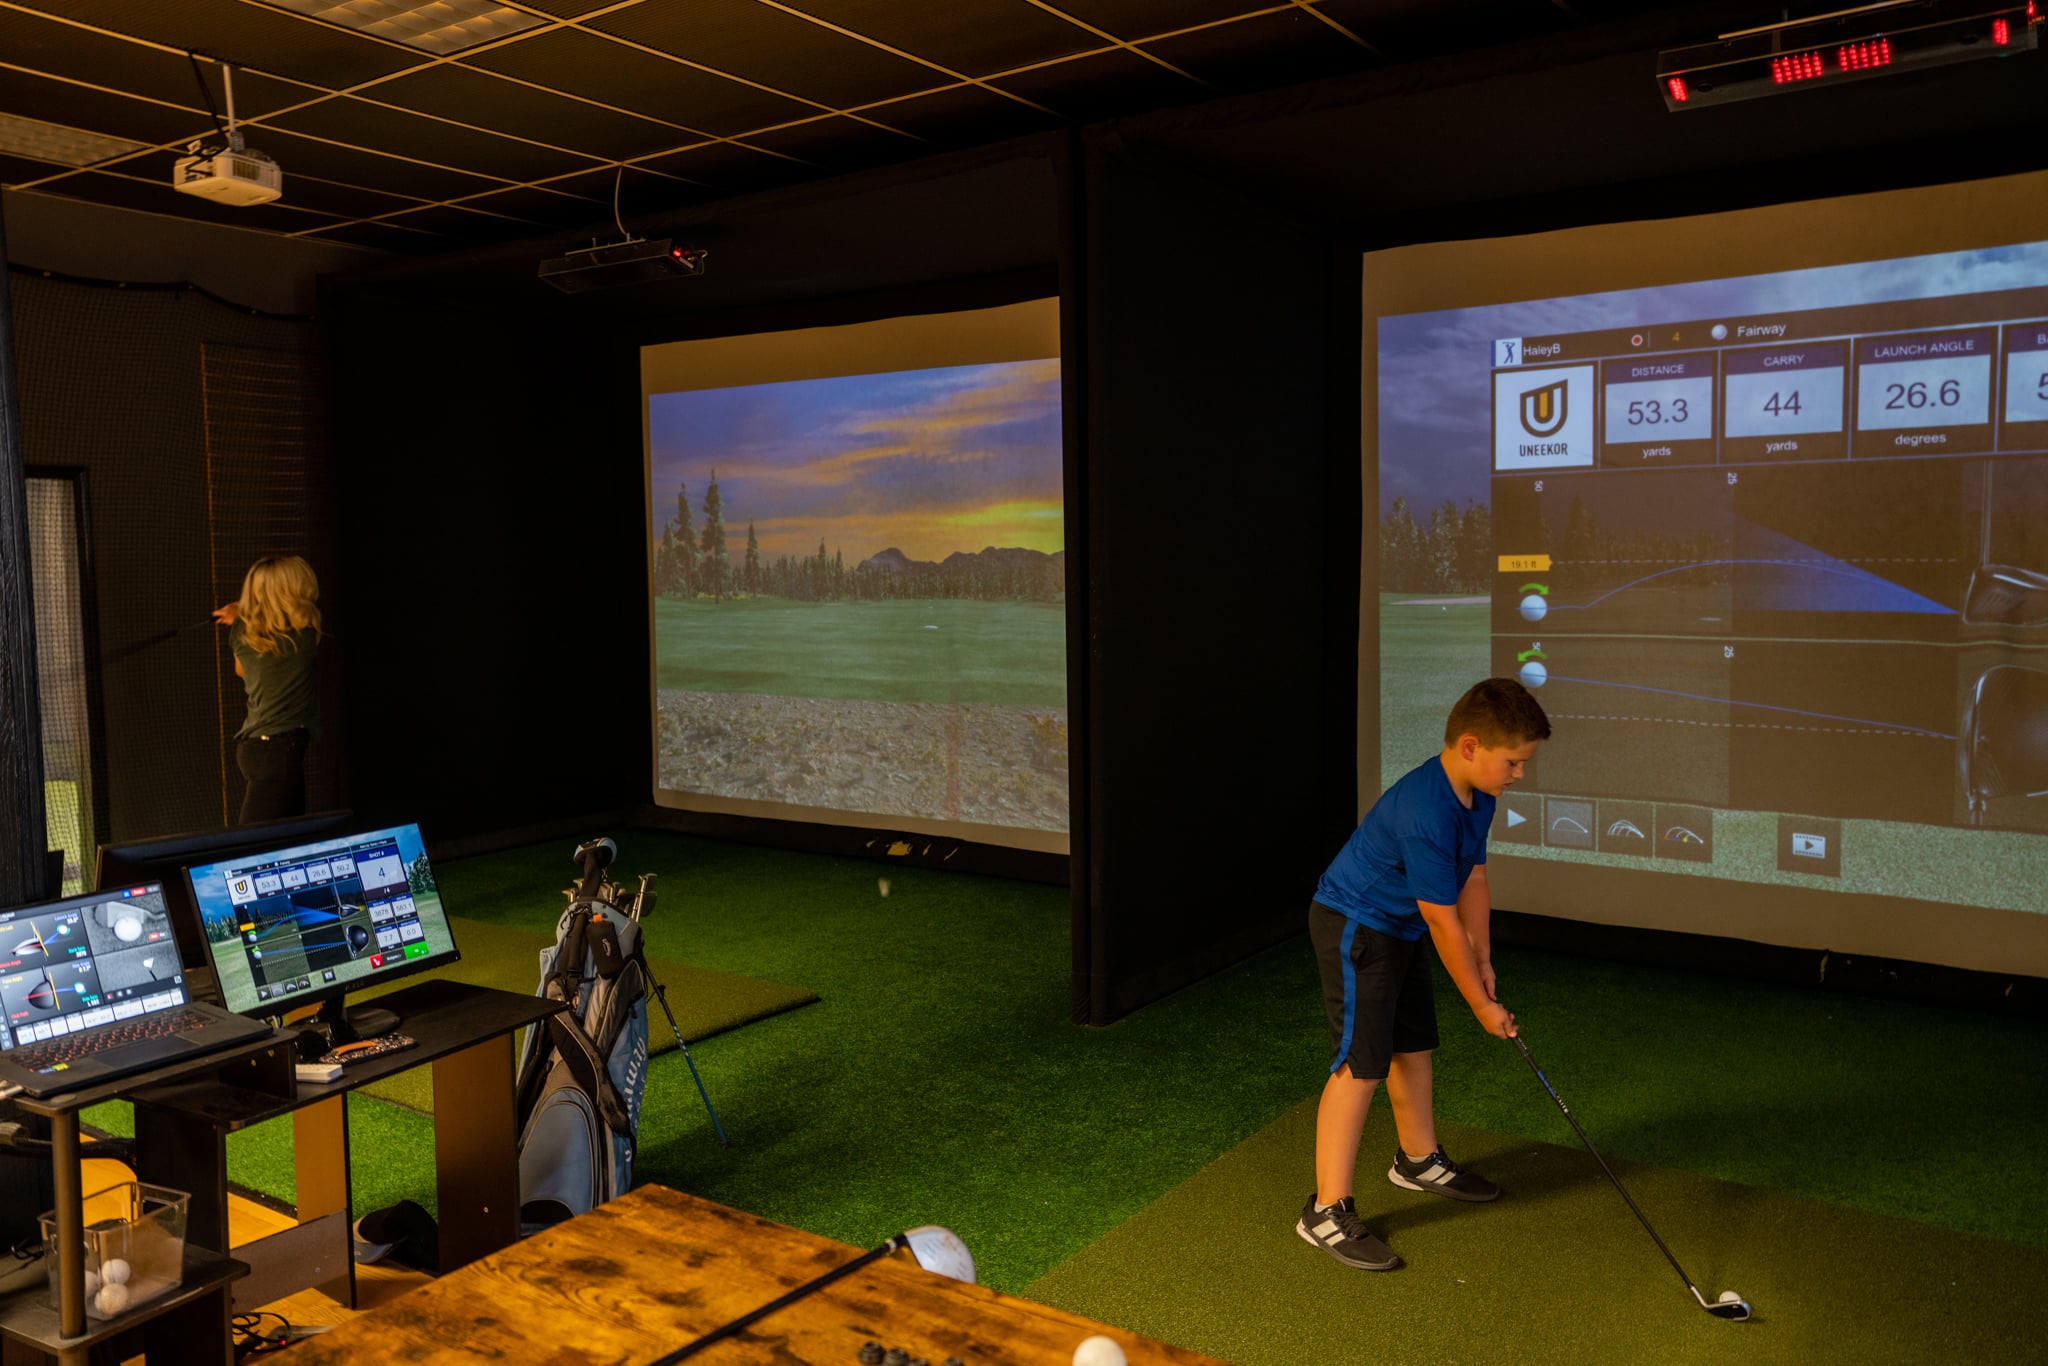 A child playing in one of two golf simulators in front of the projector.